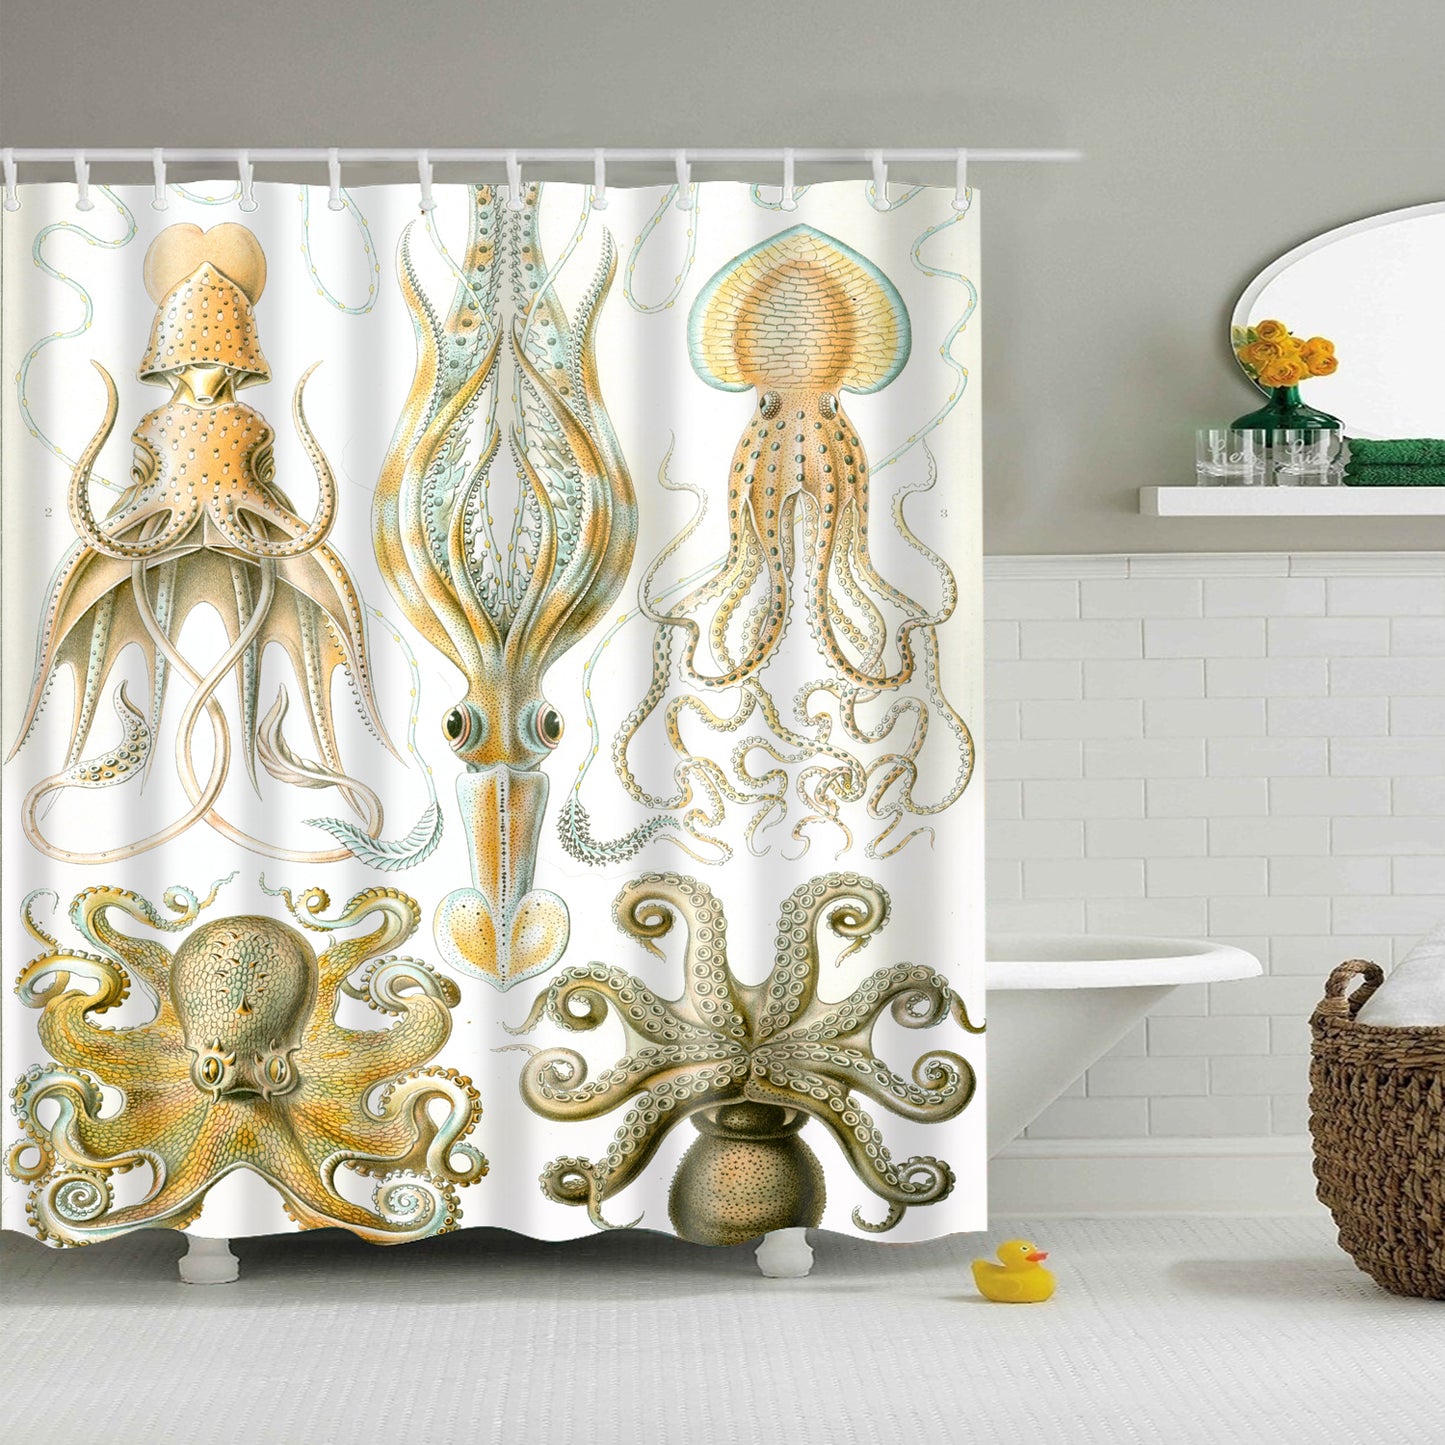 Vintage Variety Kinds of Octopus Shower Curtain